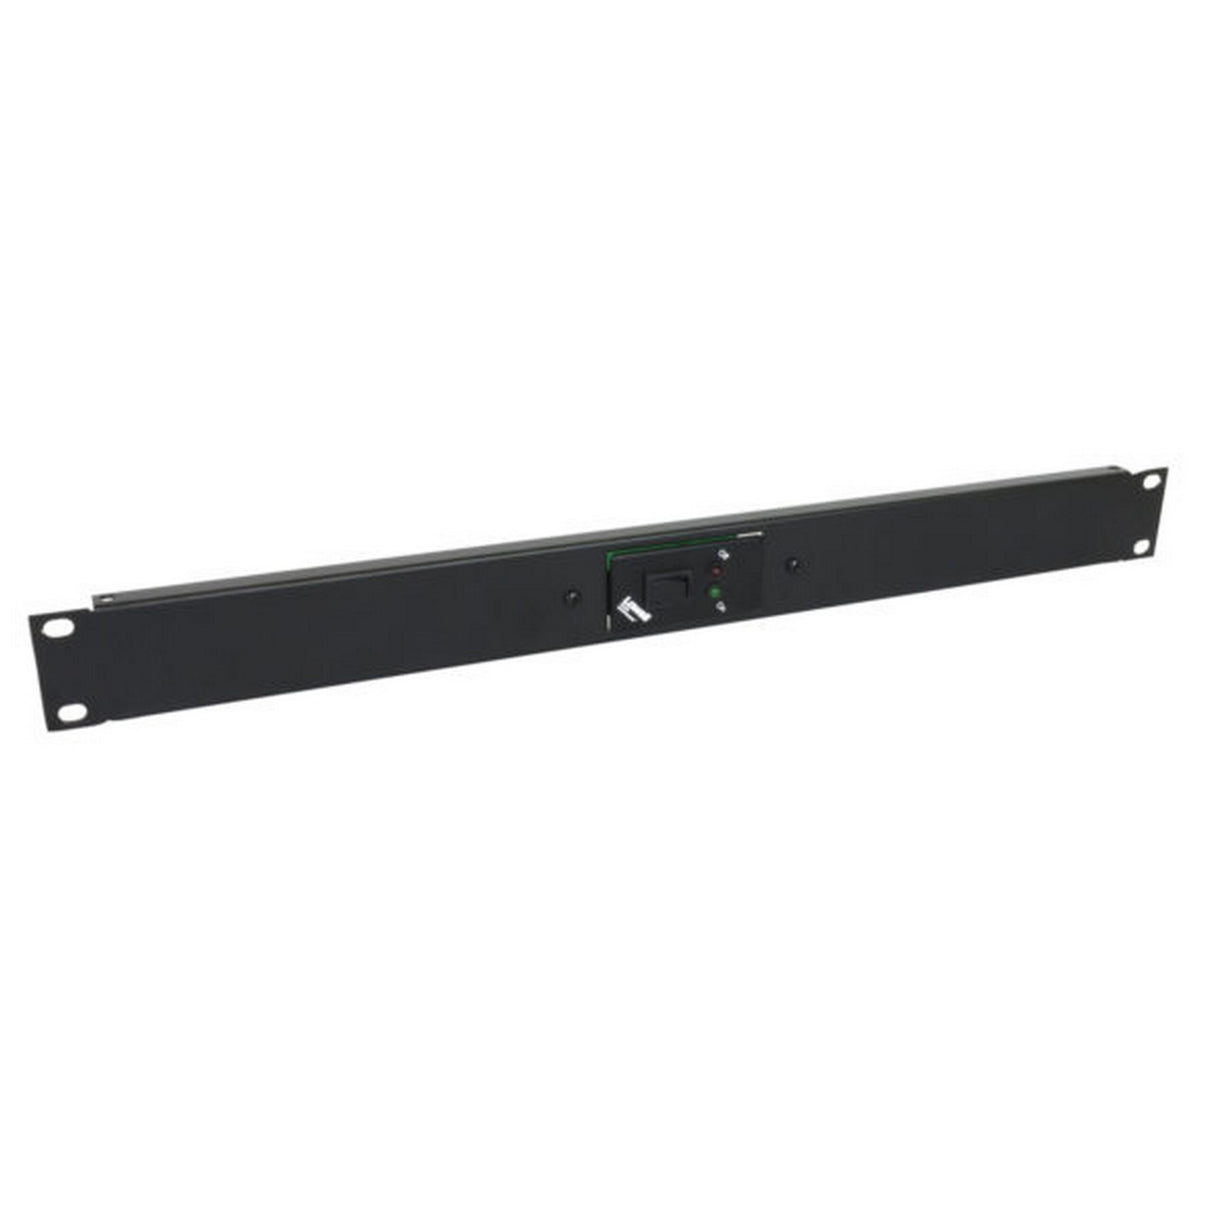 Lowell RPSB2-MR Momentary Single Pole Single Throw Low-Voltage Rackmount Switch